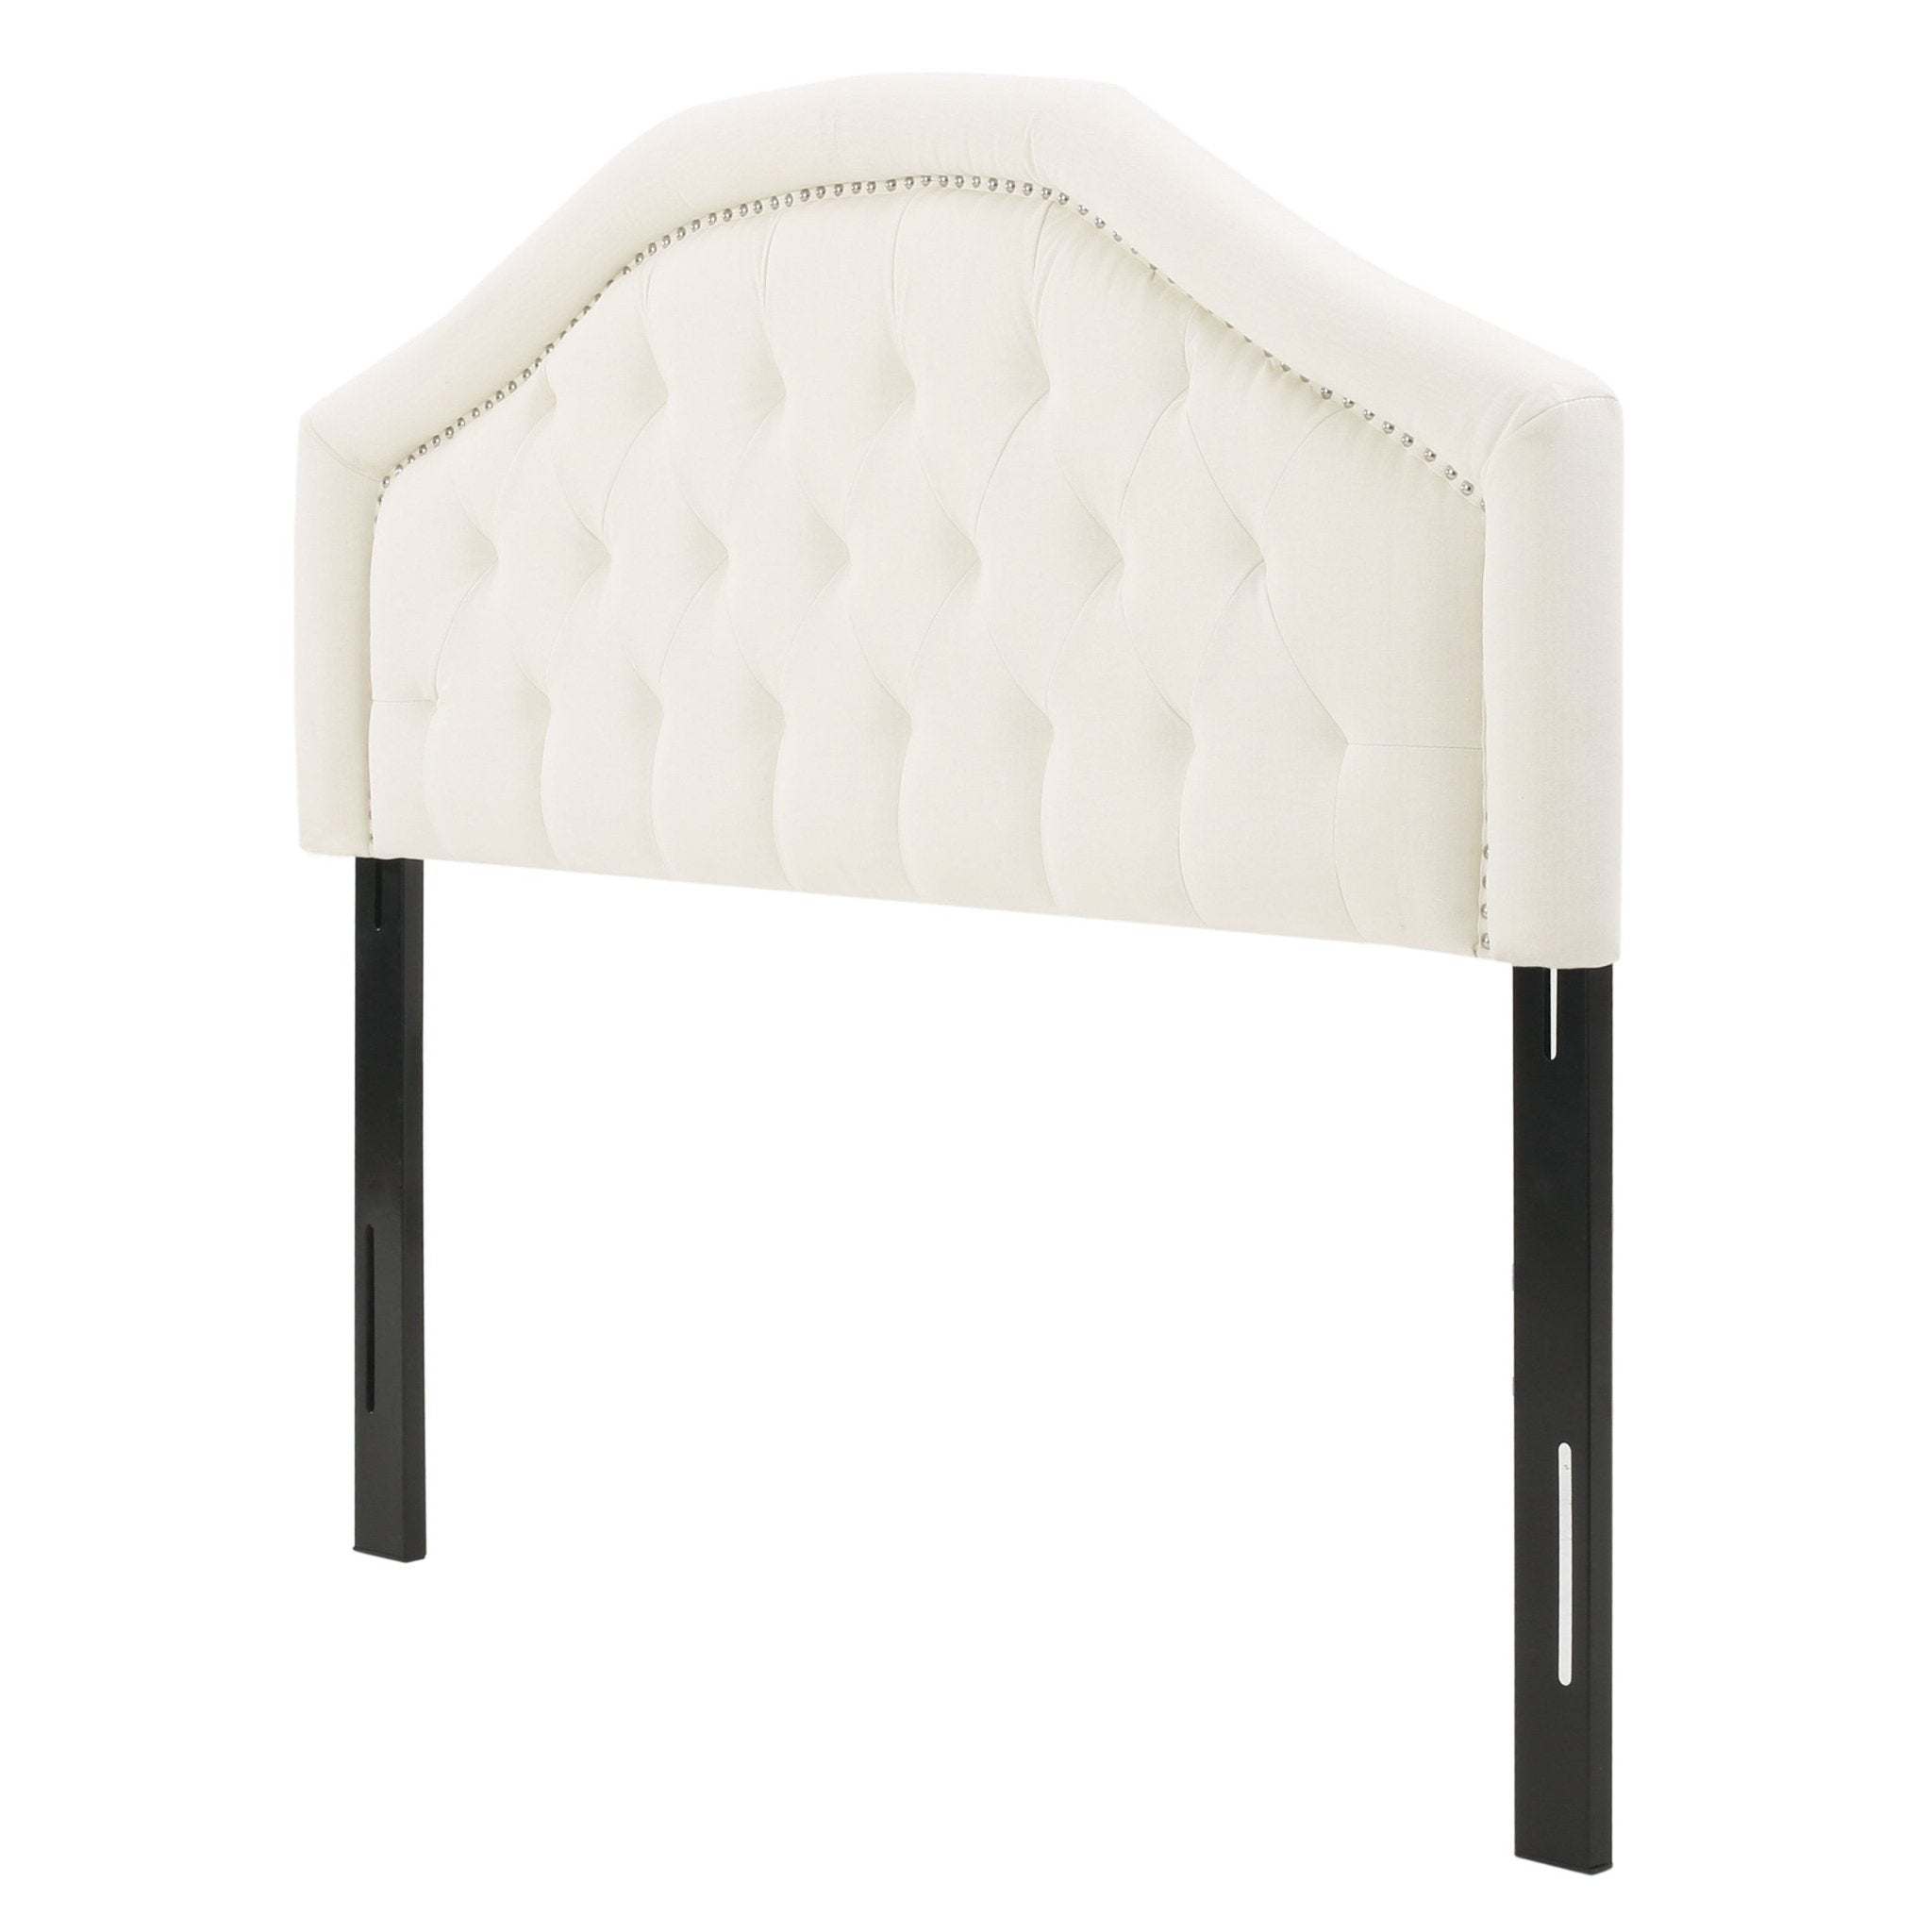 Jubilant Headboard with Diamond Tufted and Nail Head Trim Featuring, Queen and Full Size, Beige